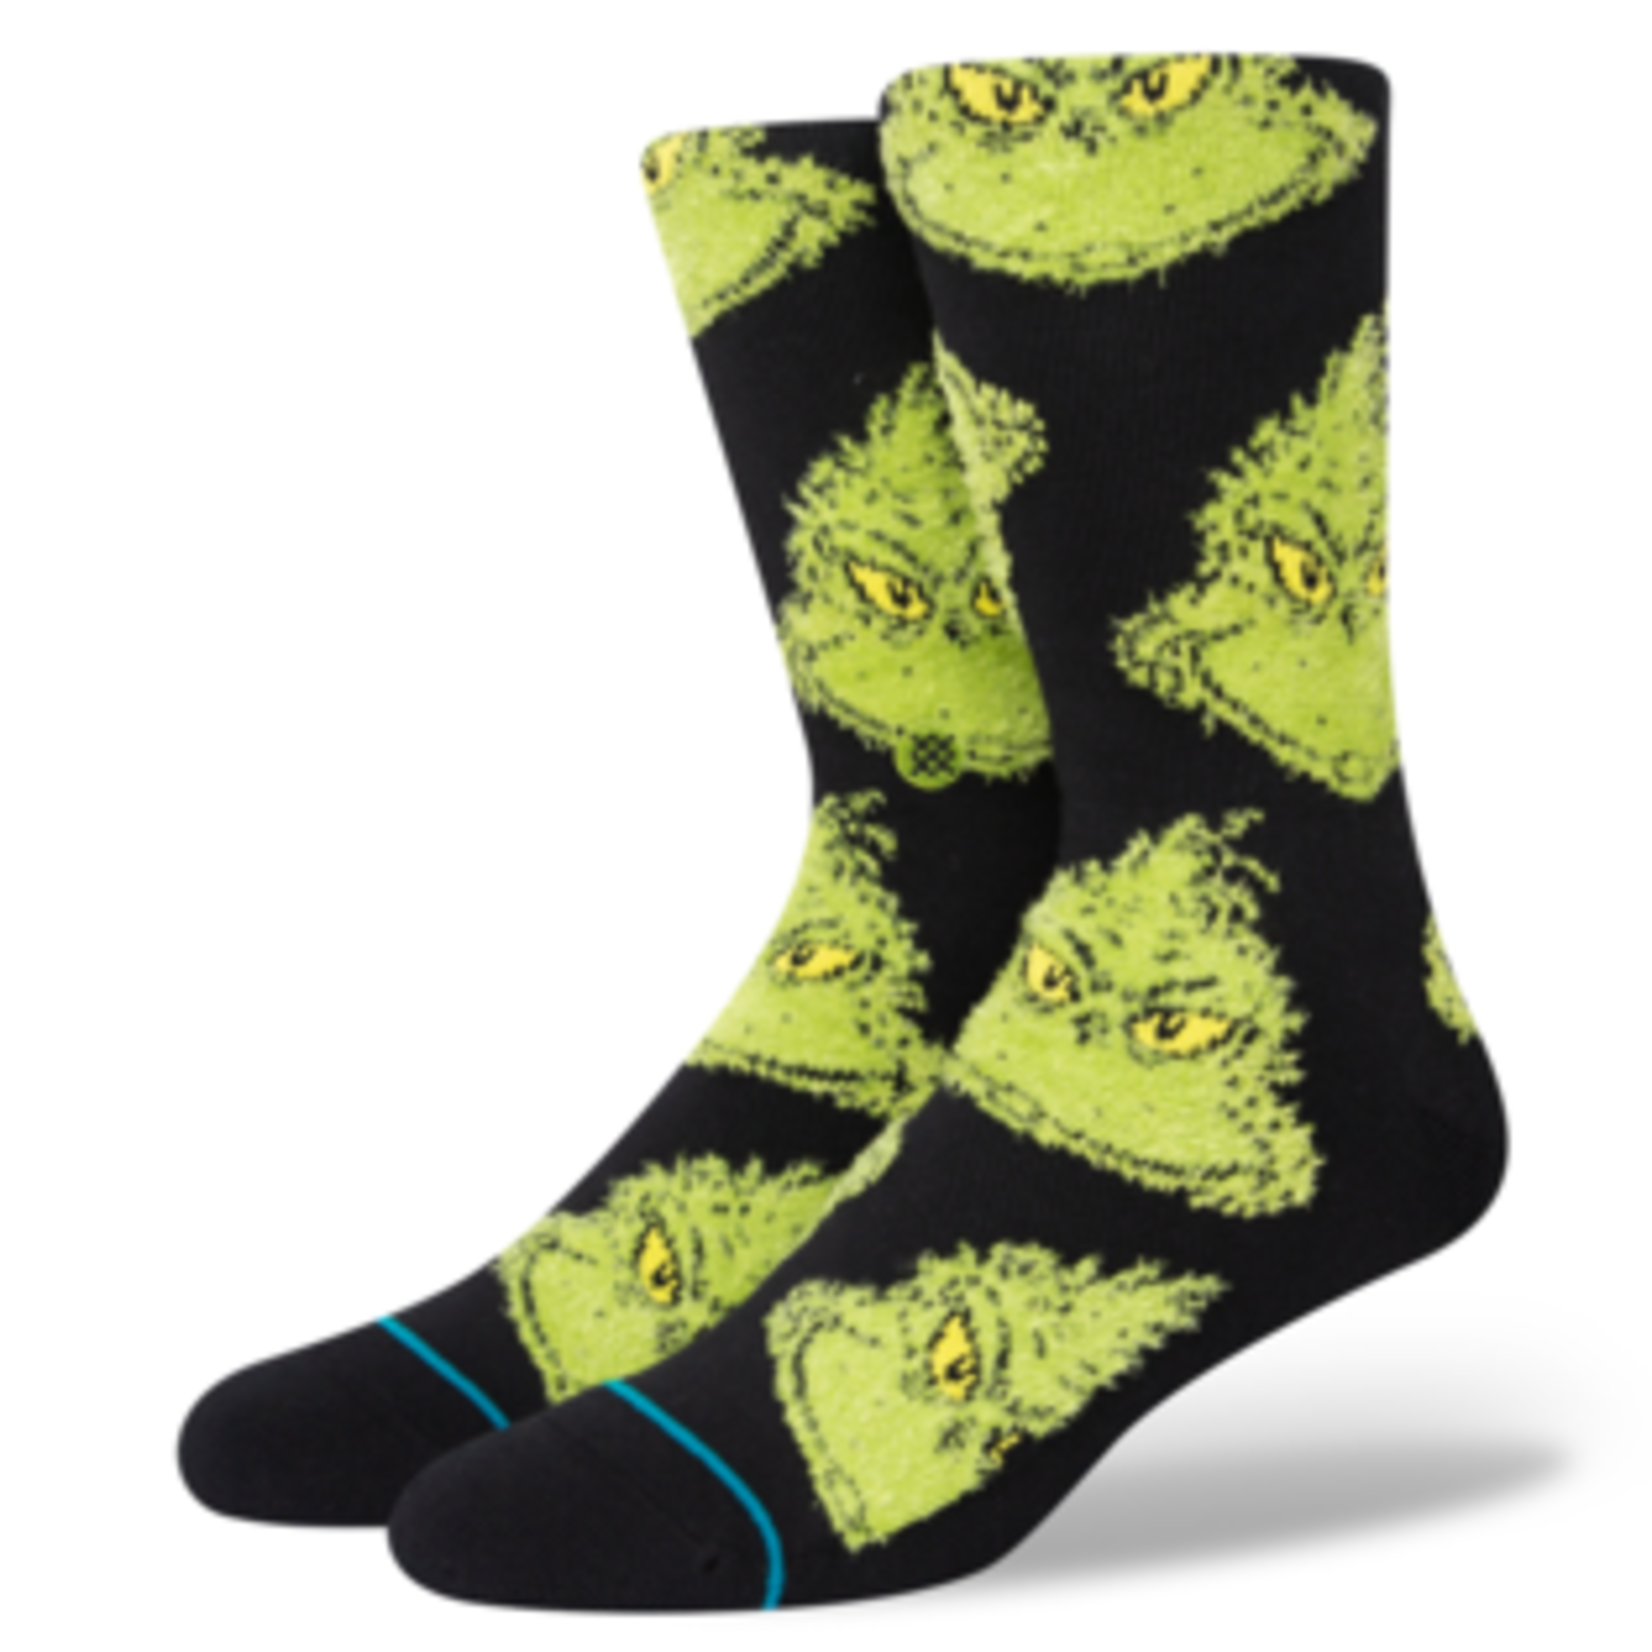 Stance Stance Socks, Grinch Mean One